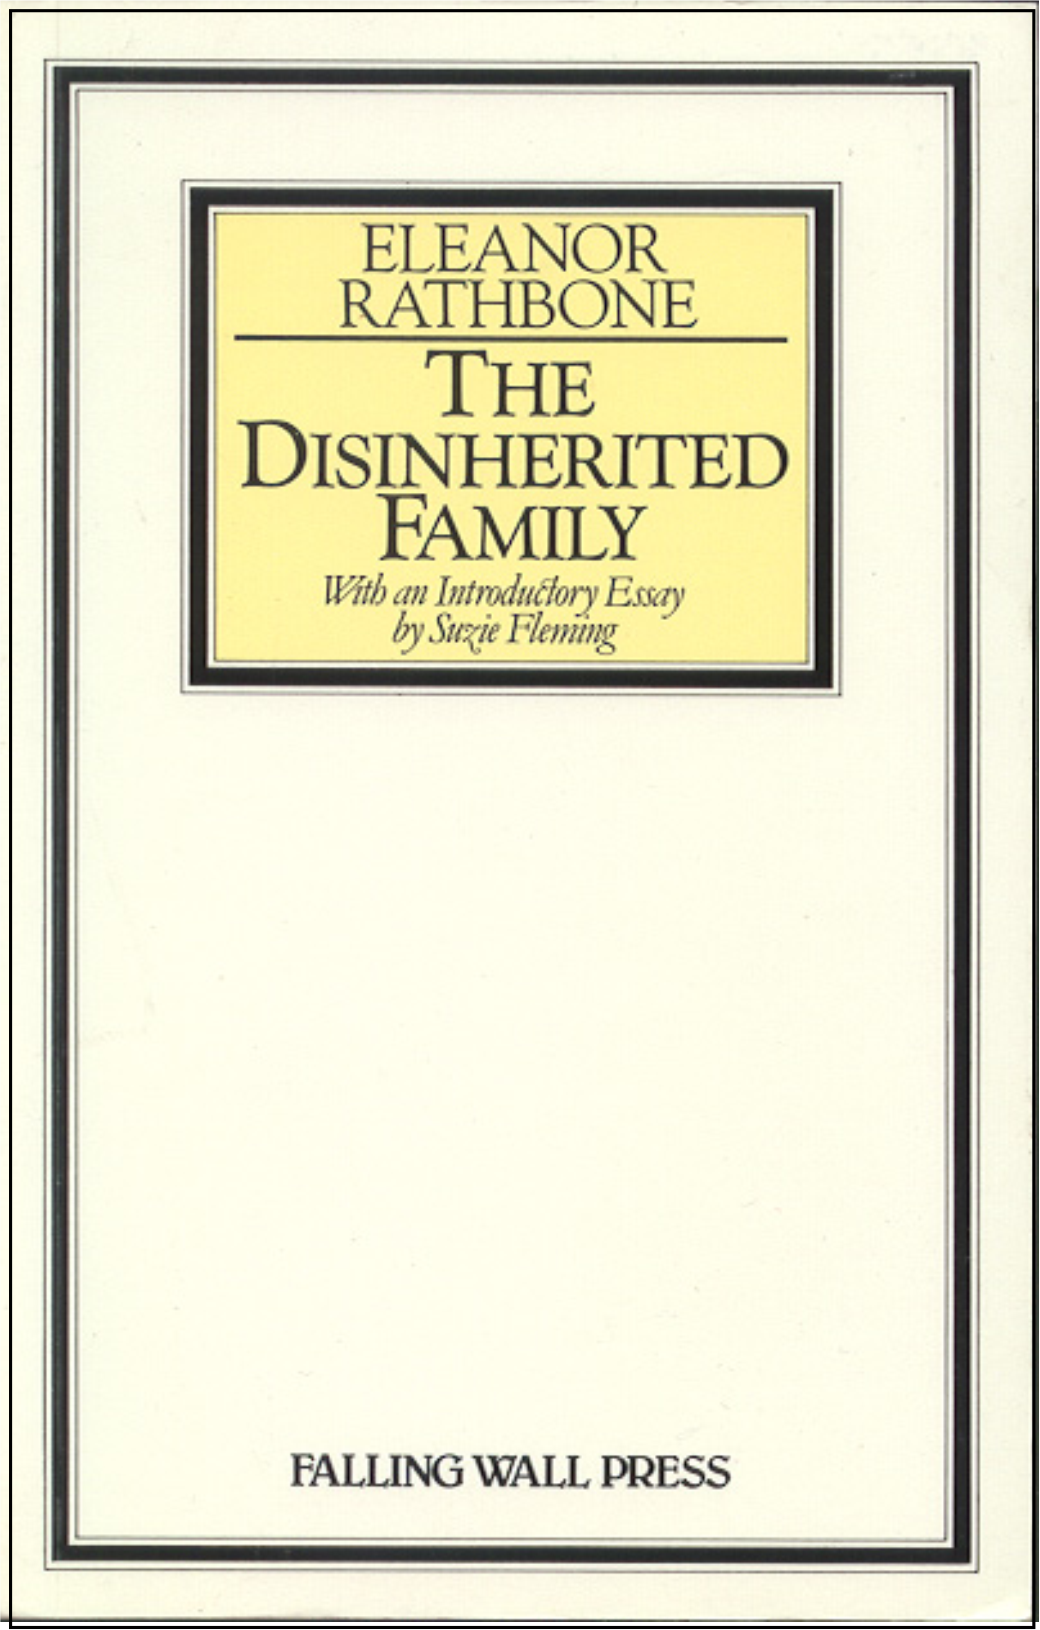 The Disinherited Family